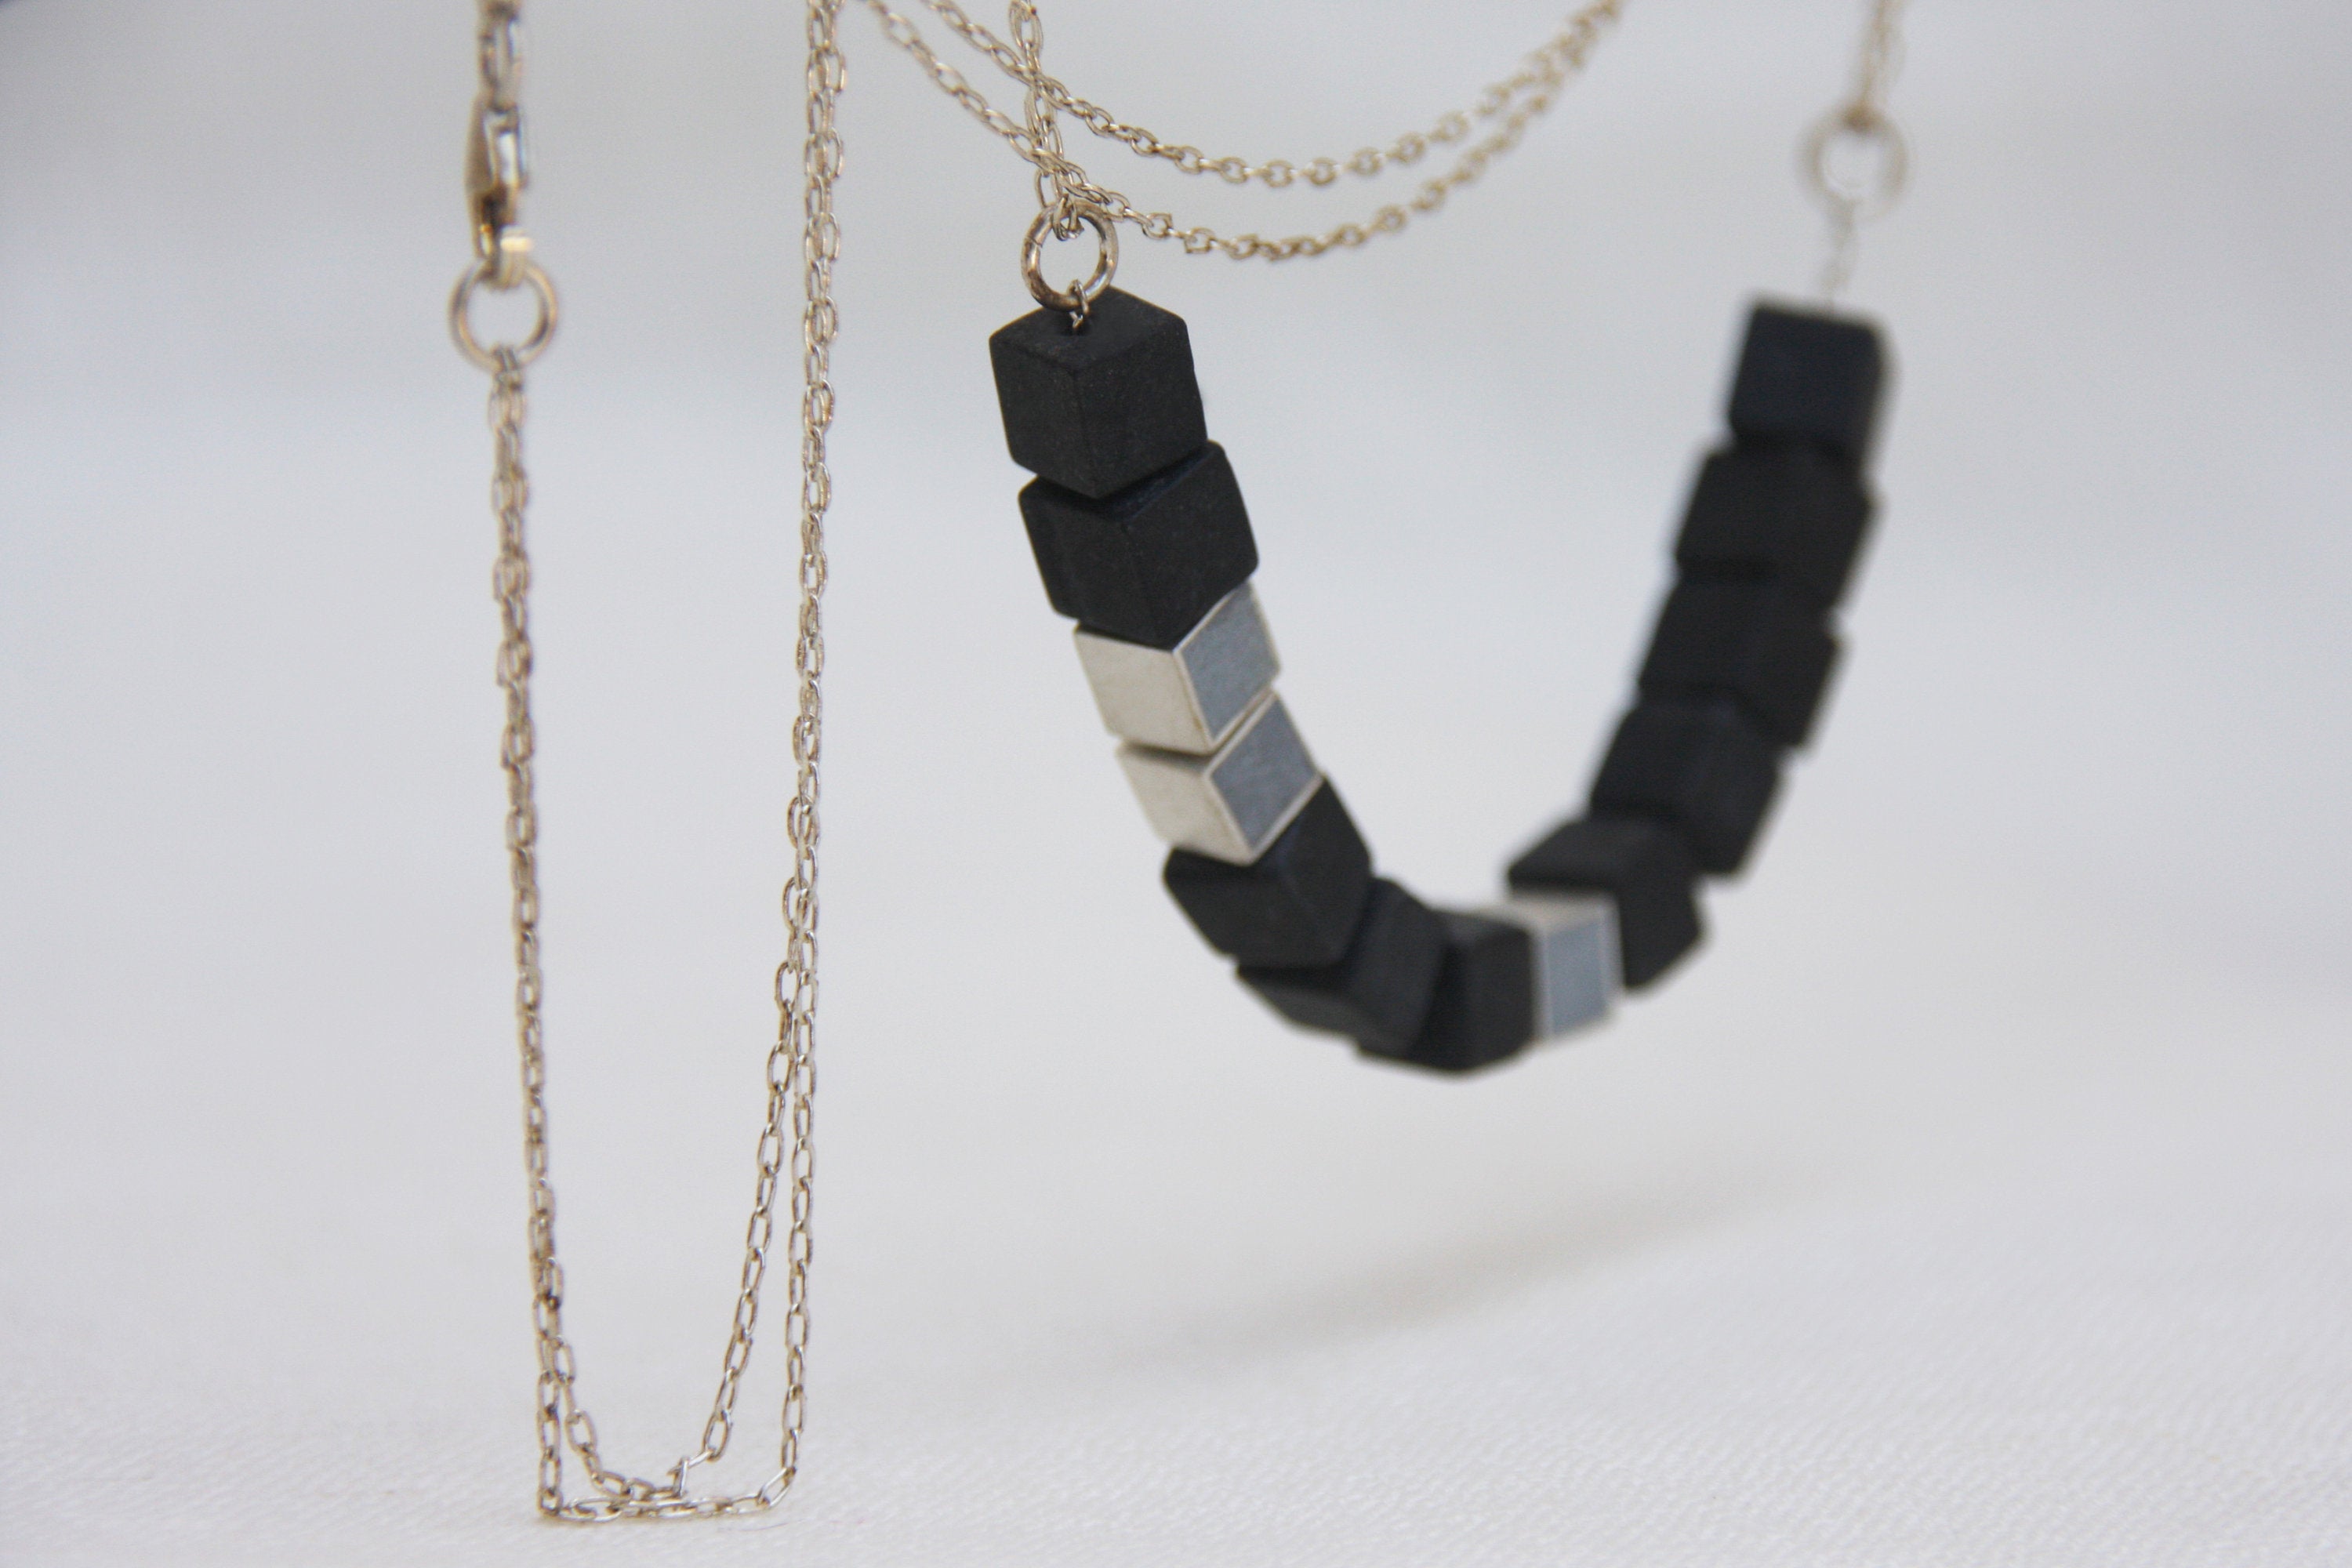 Concrete Silver And Onyx Cube Necklace, contemporary necklace By hadas shaham - hs